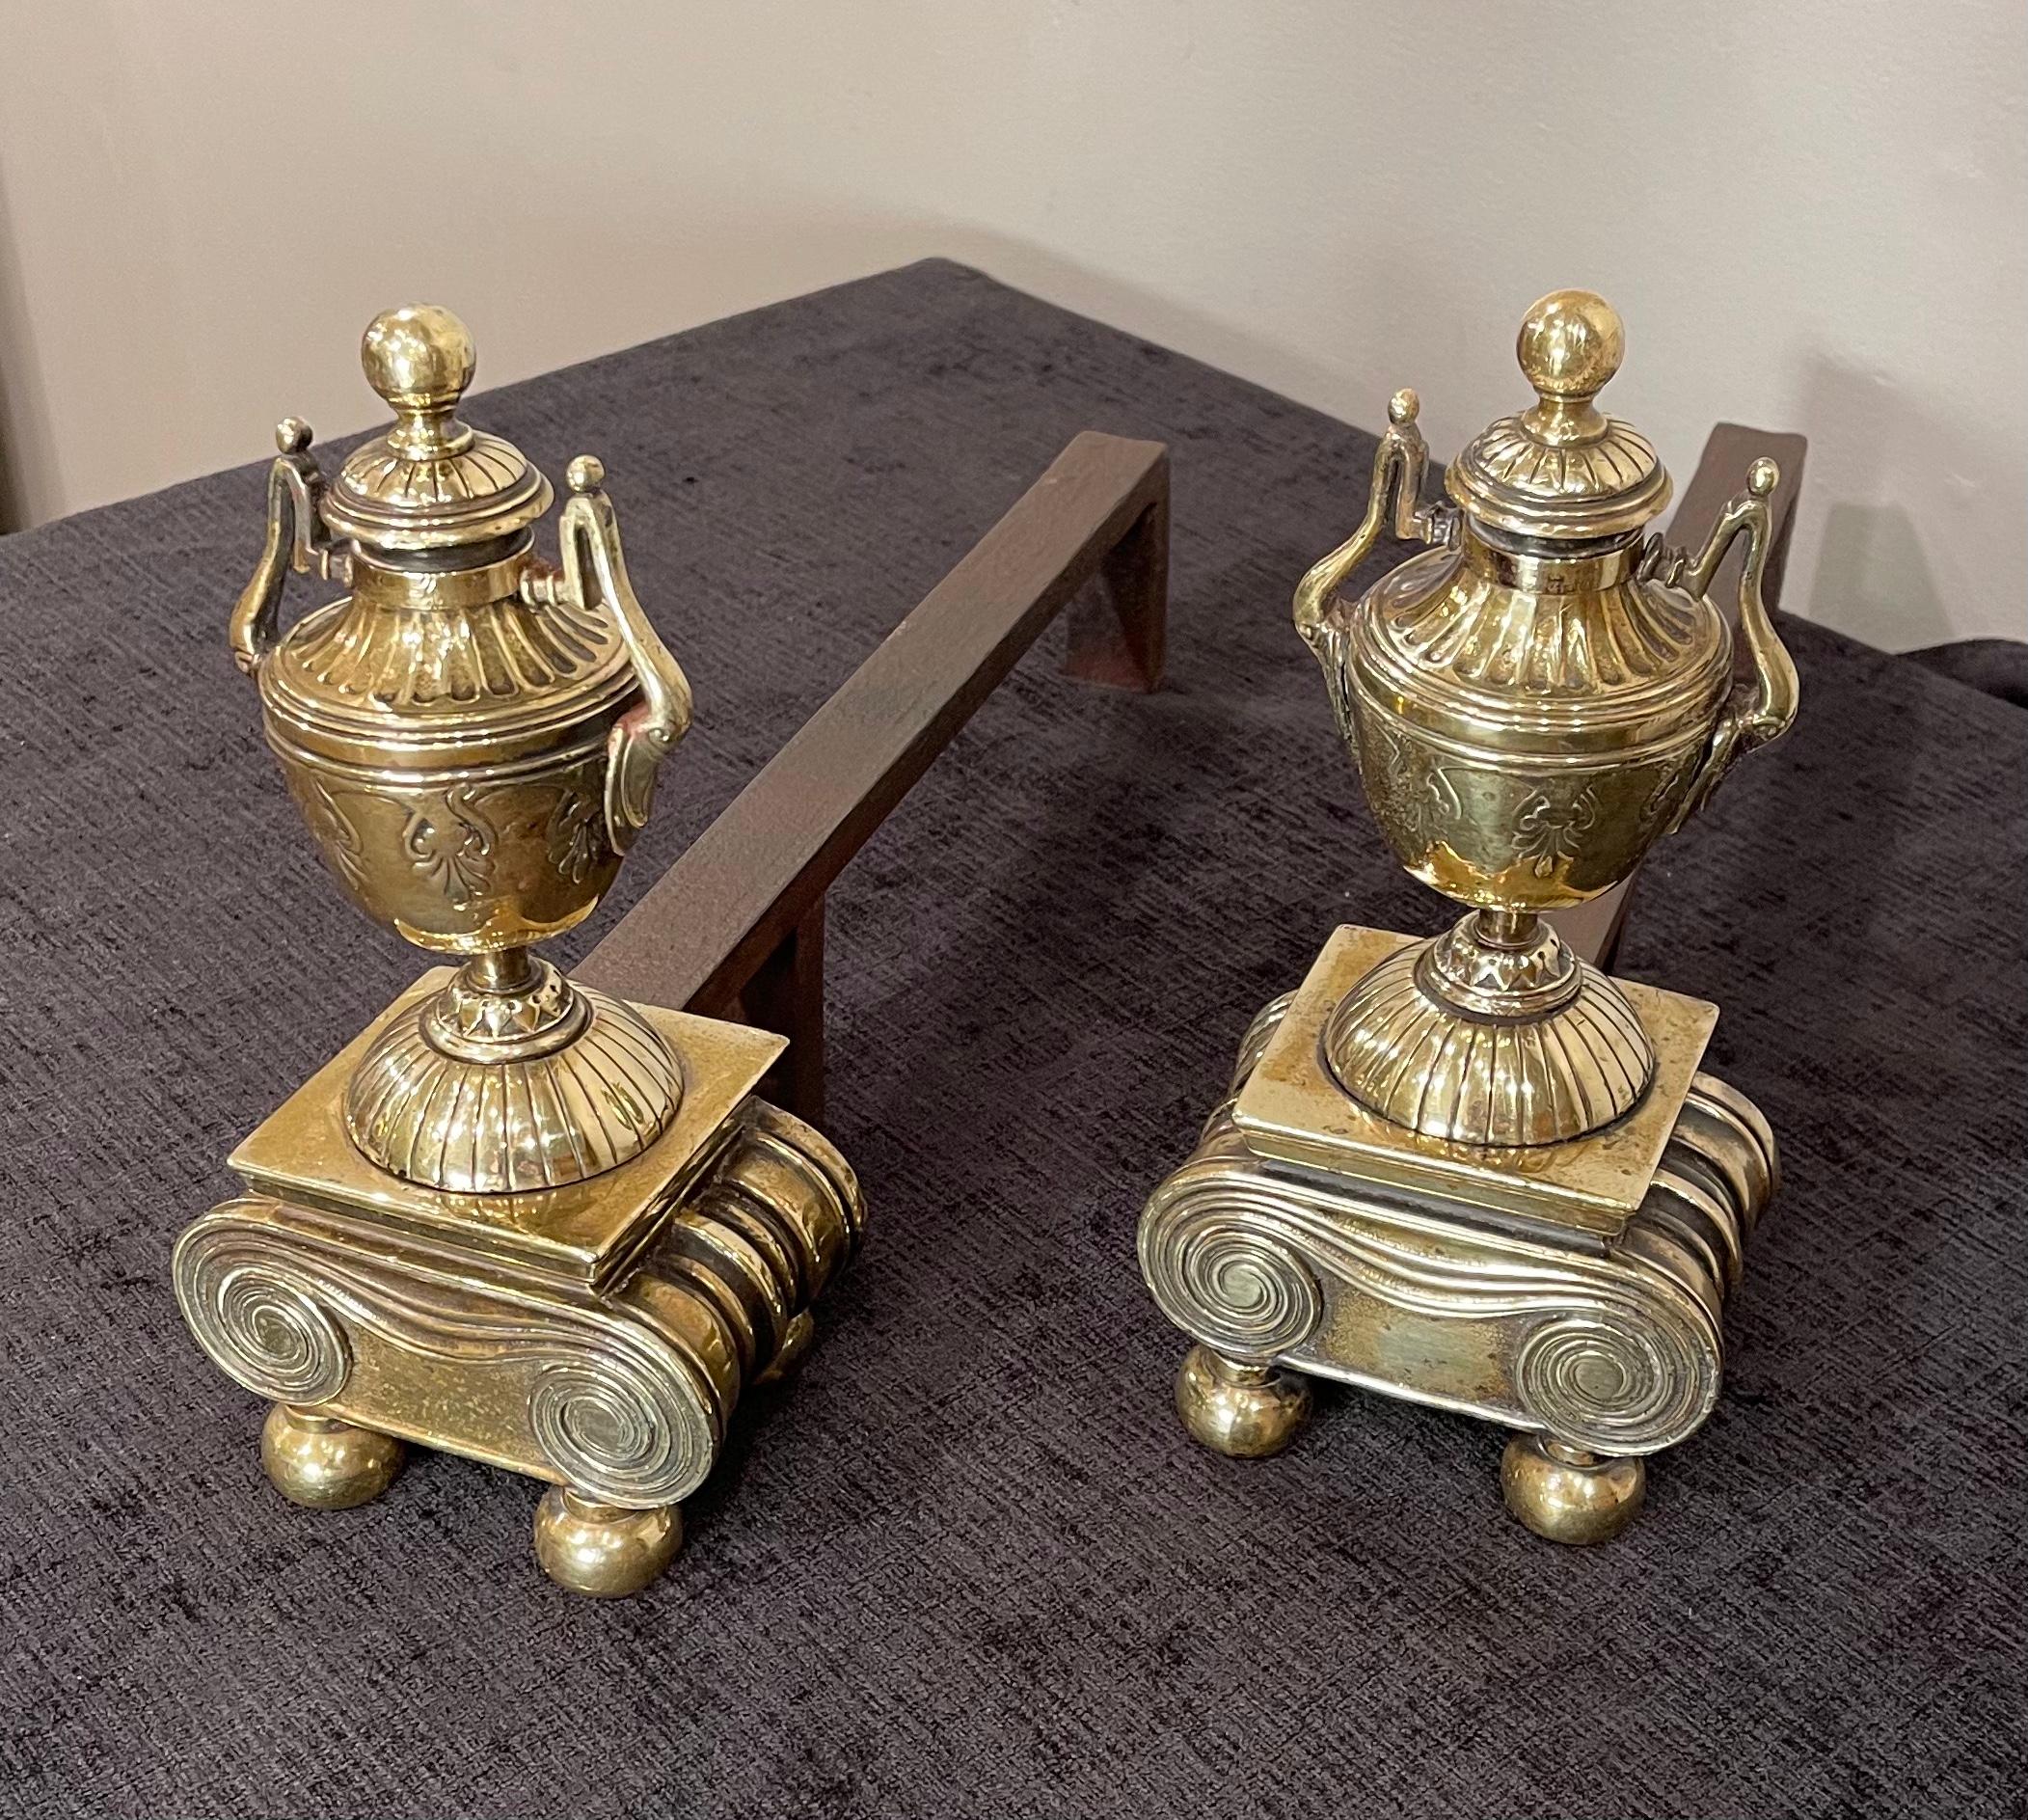 A Pair of Brass Andirons, of diminutive proportions

Urn form, raised on scrolled base with Brass ball feet 

Tightened cleaned & polished.